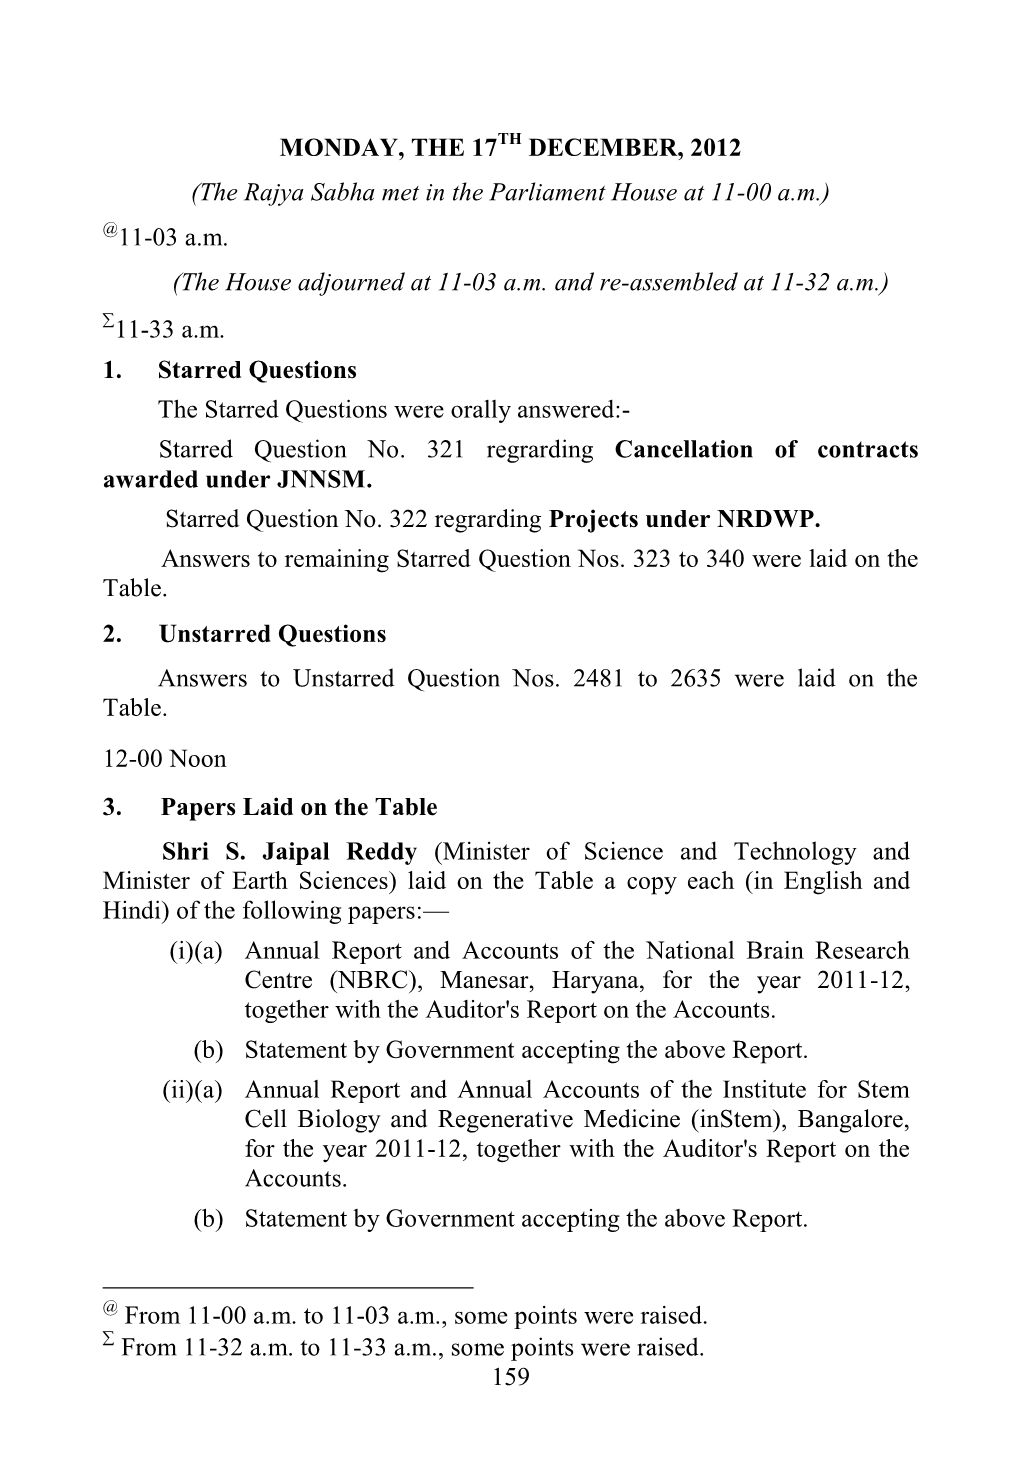 159 MONDAY, the 17TH DECEMBER, 2012 (The Rajya Sabha Met in the Parliament House at 11-00 A.M.) @11-03 A.M. (The House Adjourne